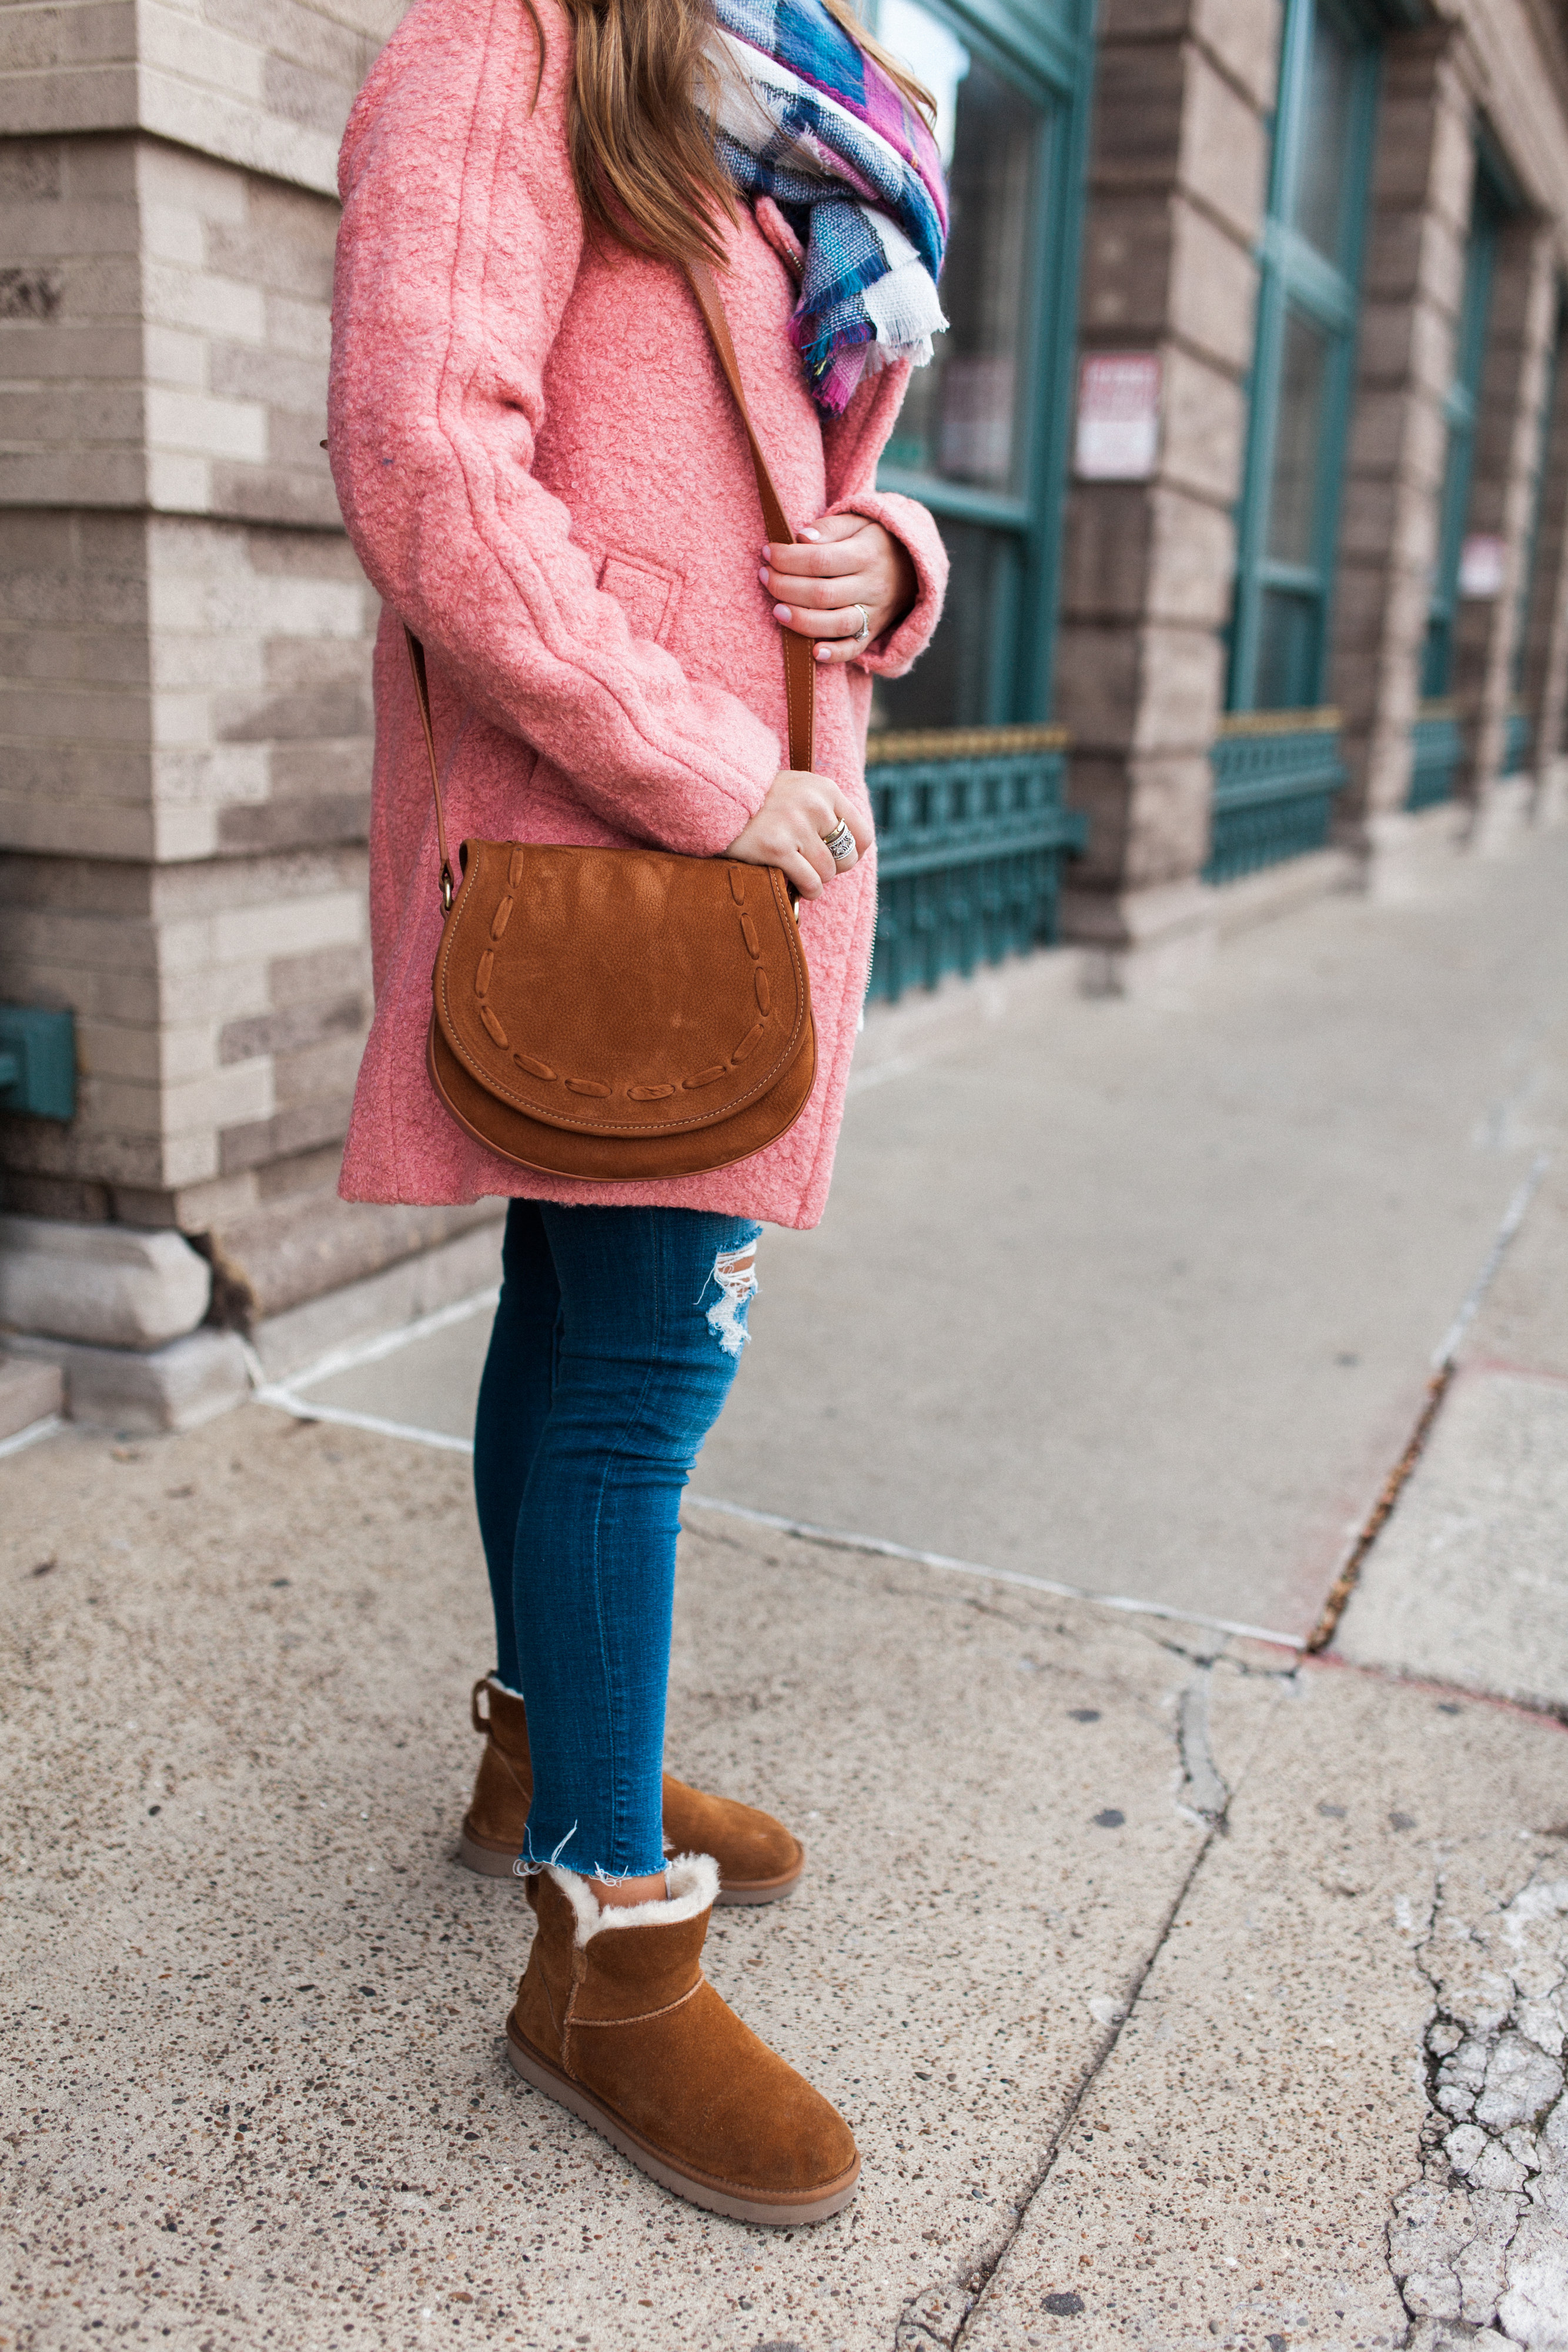 How to style a colorful coat 